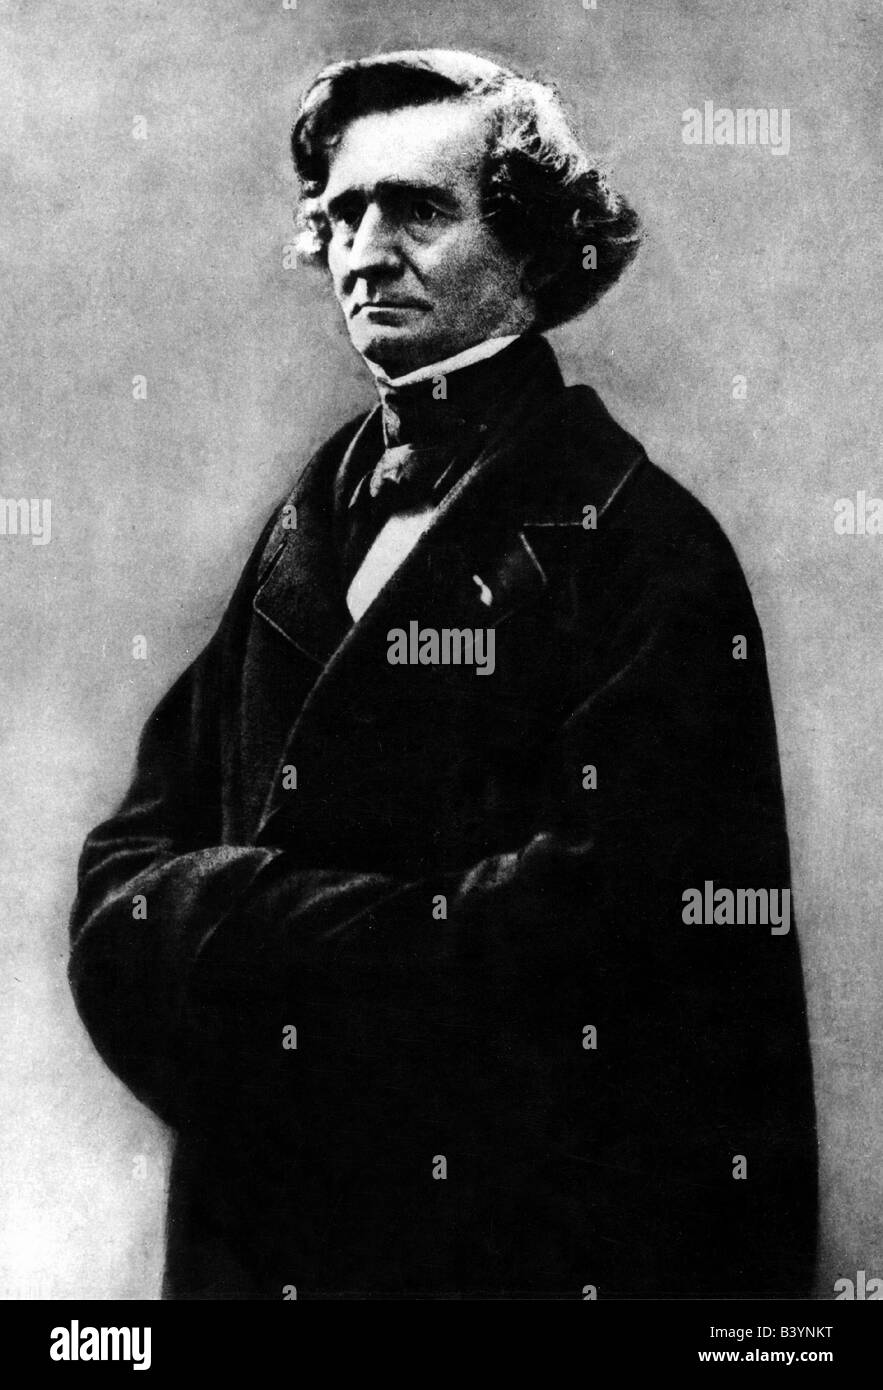 Berlioz, Hector Louis, 11.12.1803 - 8.3.1869, French Composer, half length, 1850s, photography by Nadar, Stock Photo